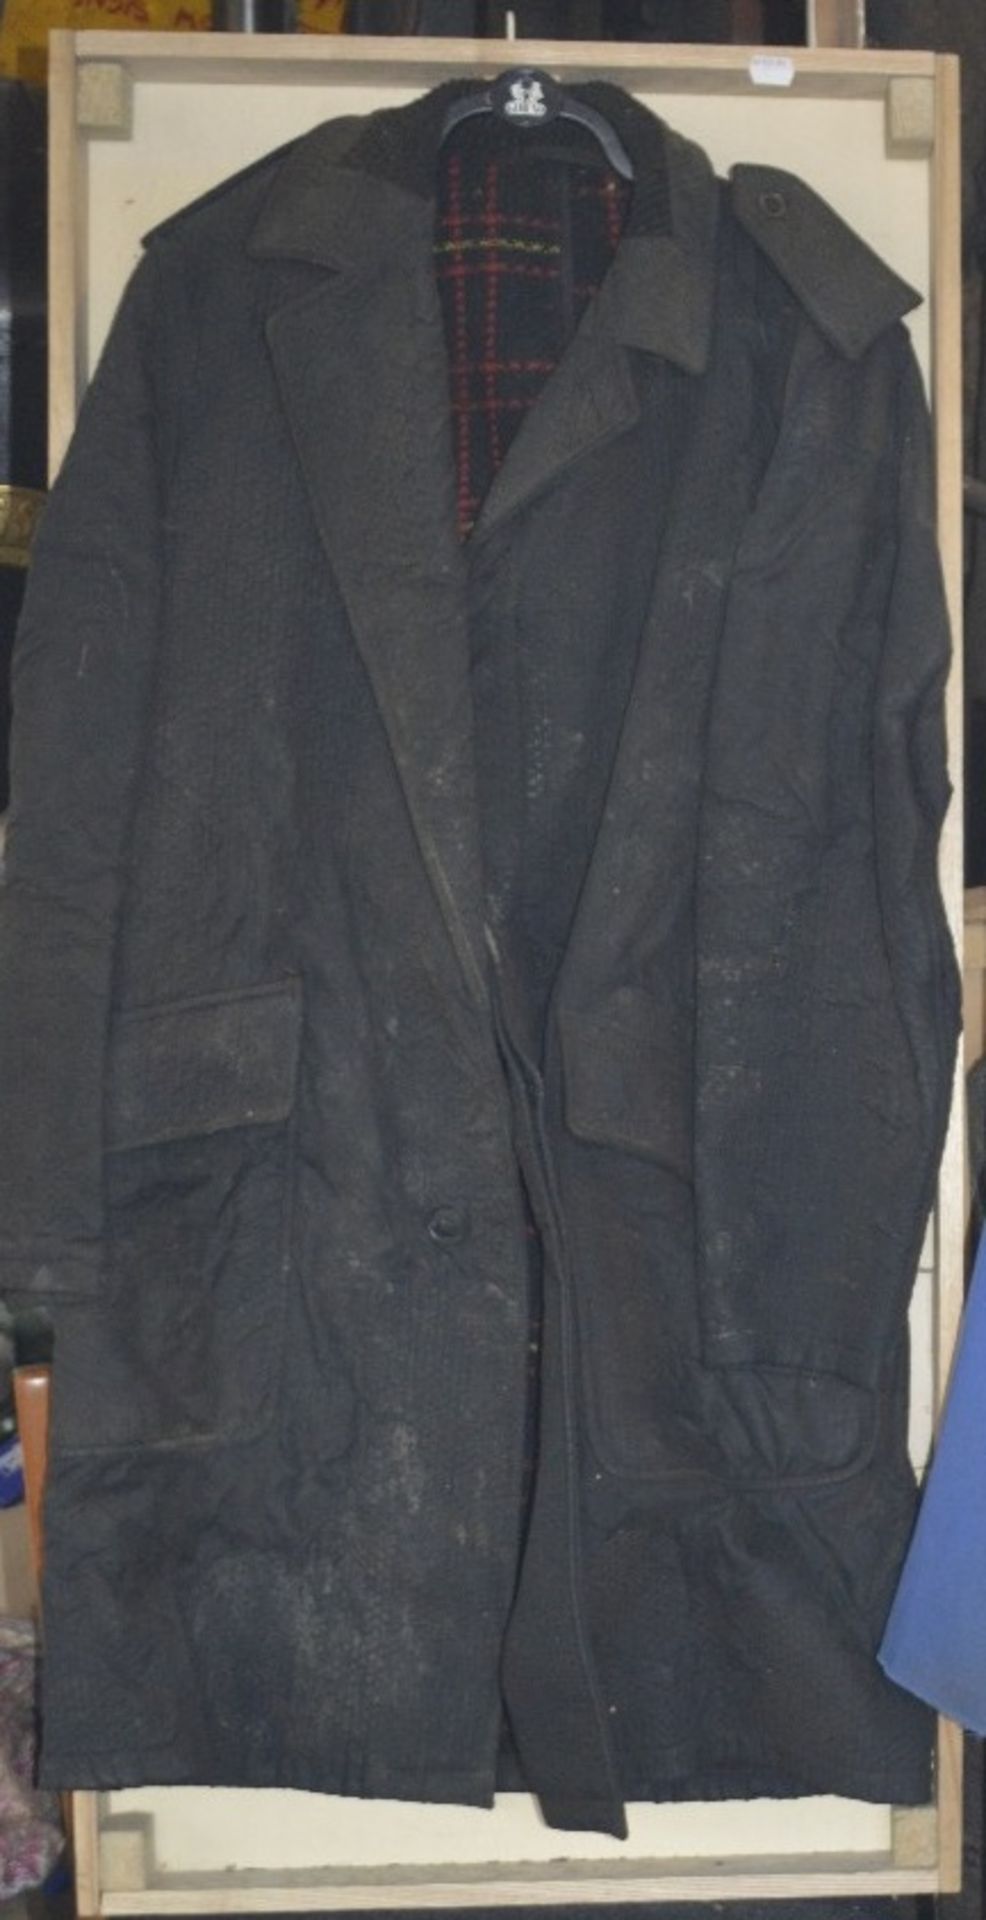 WITHDRAWN A black overcoat, believed to have been owned and worn by Fred Dibnah, in display case.